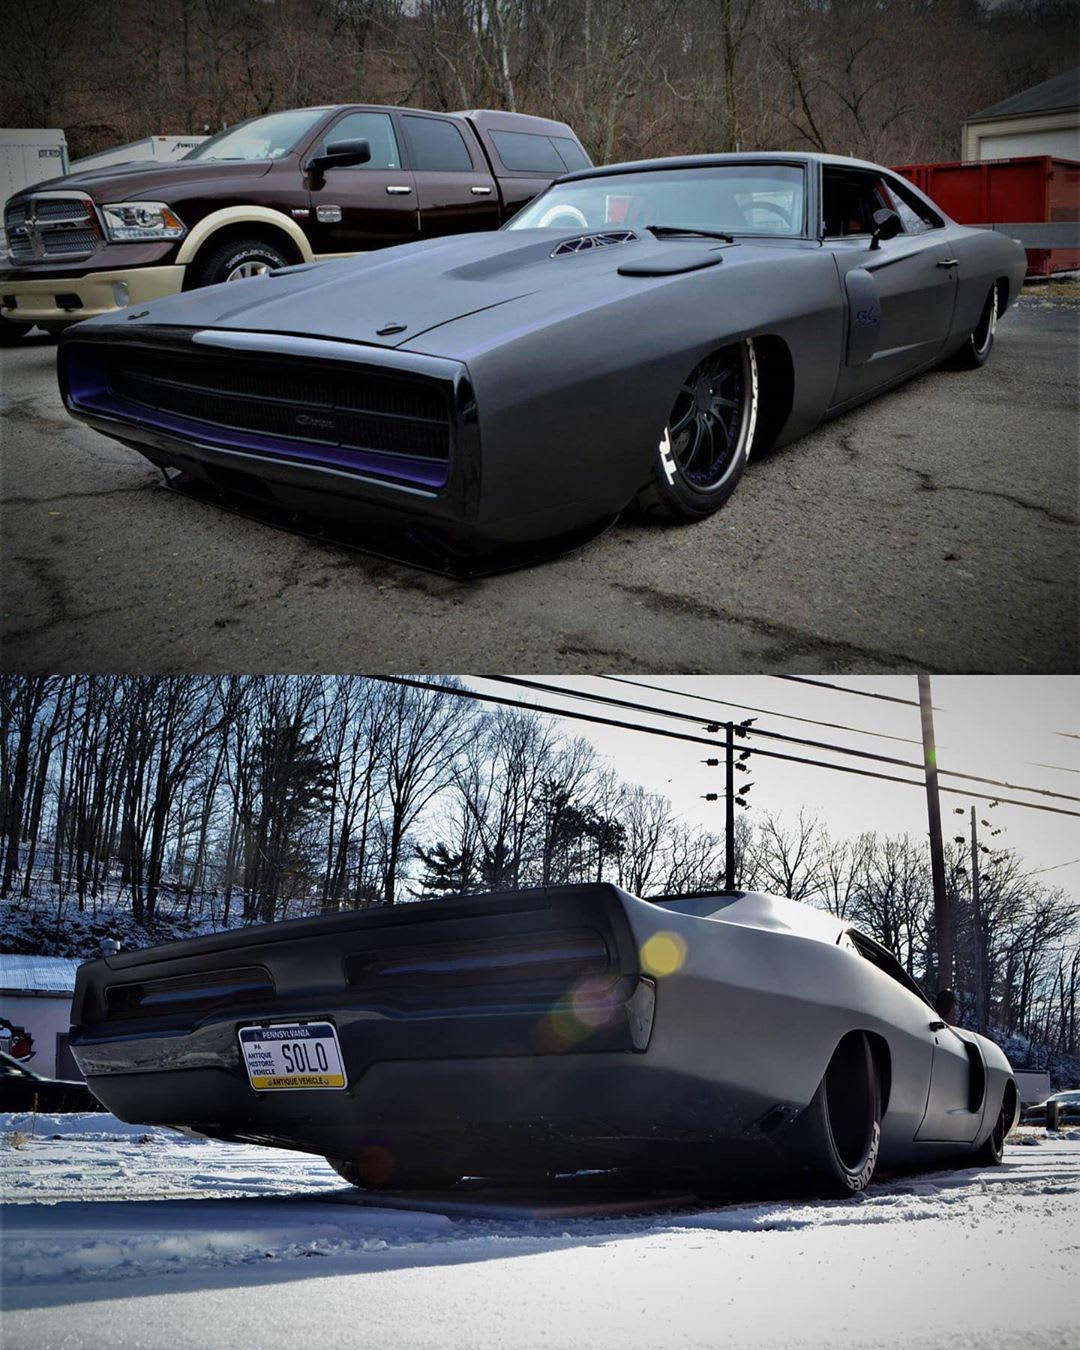 70 Charger with a 745hp Nascar cup engine